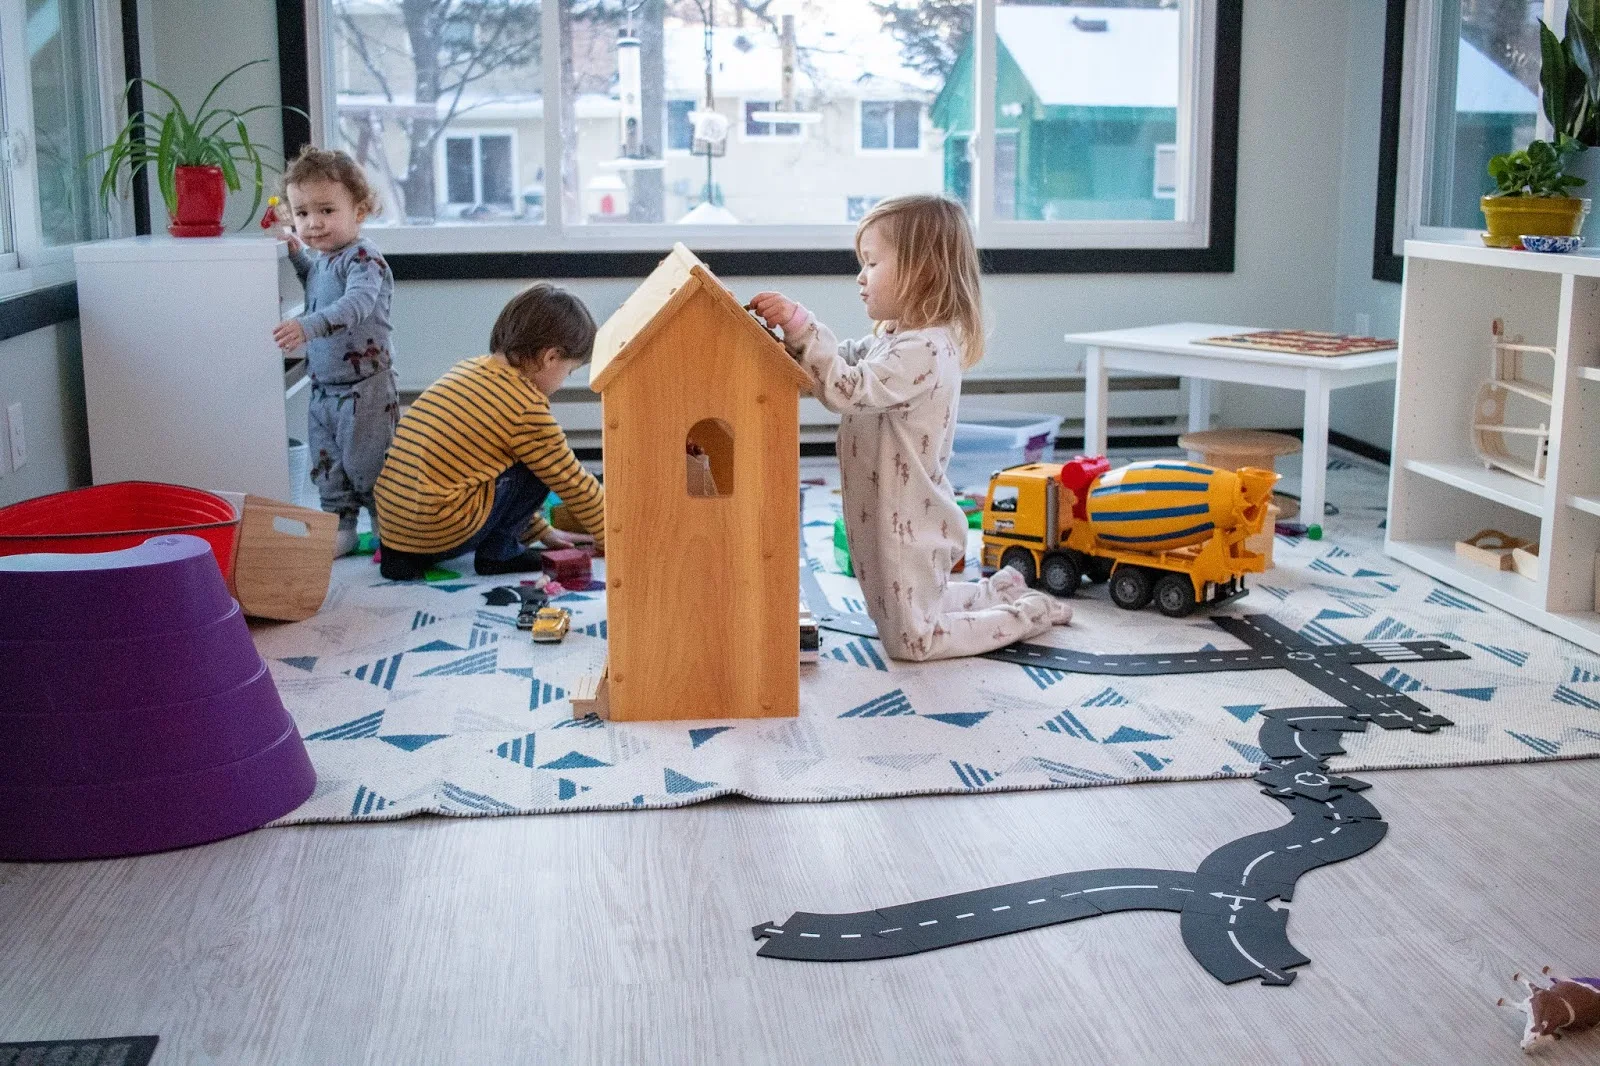 5 tips for making clean up of open ended toys a successful process - here are few things to keep in mind as your children learn to clean up from larger messes.